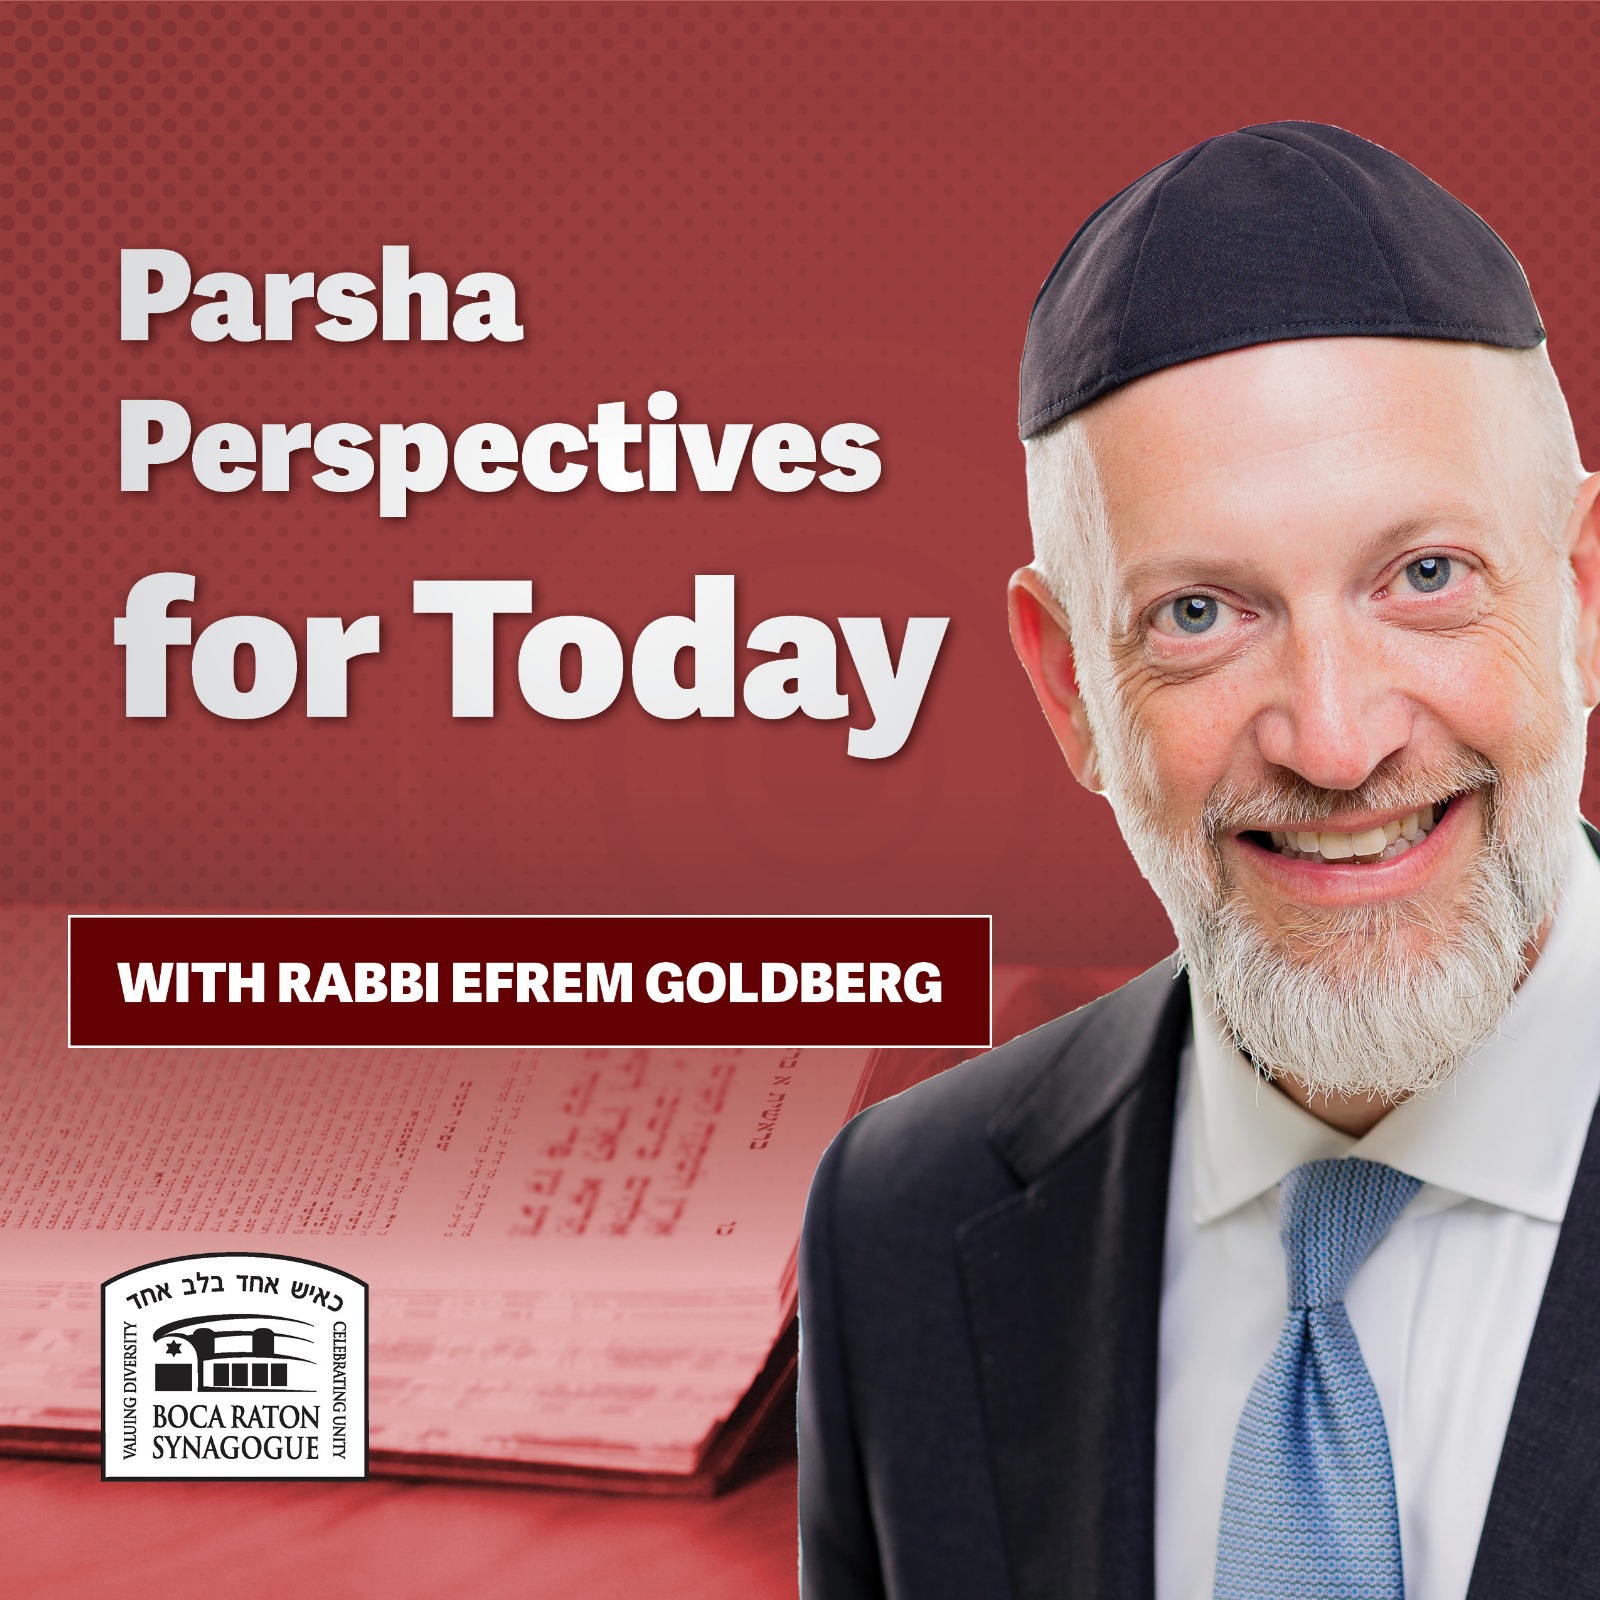 Parsha Perspectives